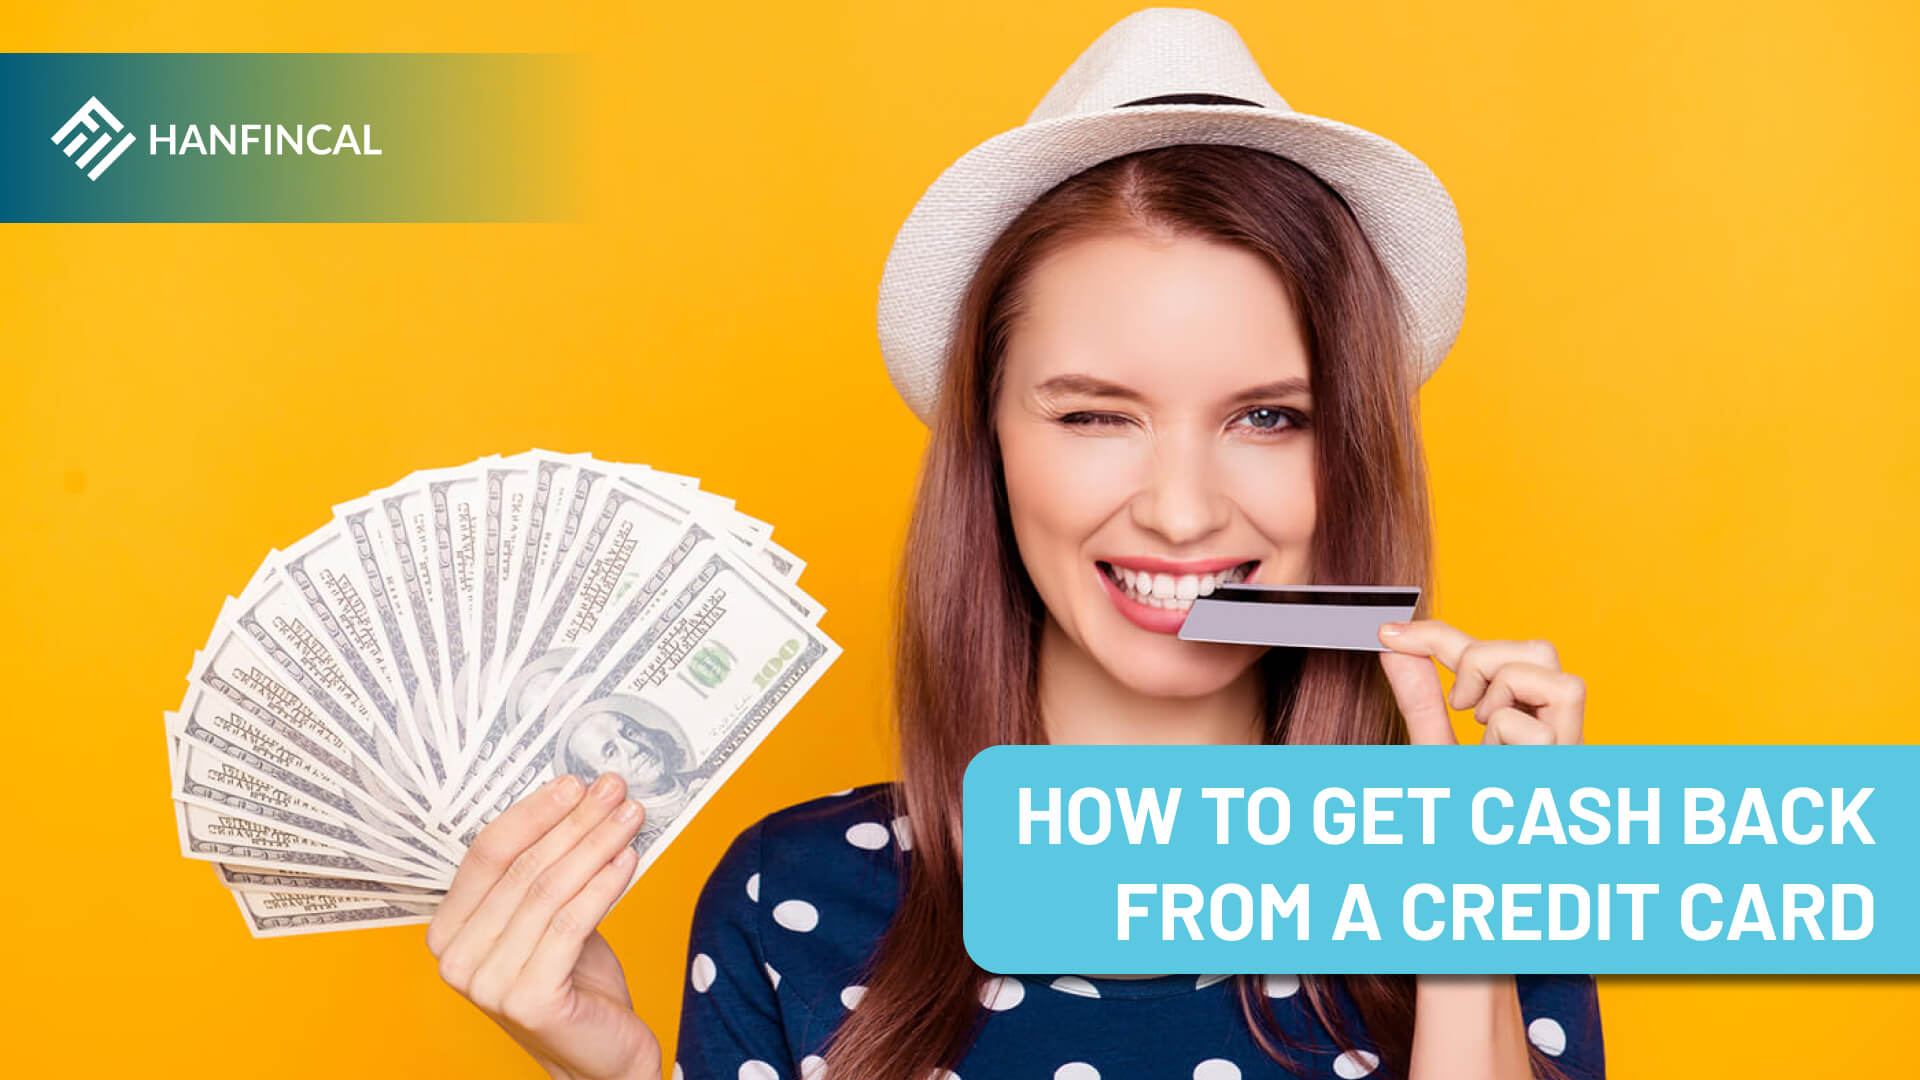 How to get cash back from a credit card?